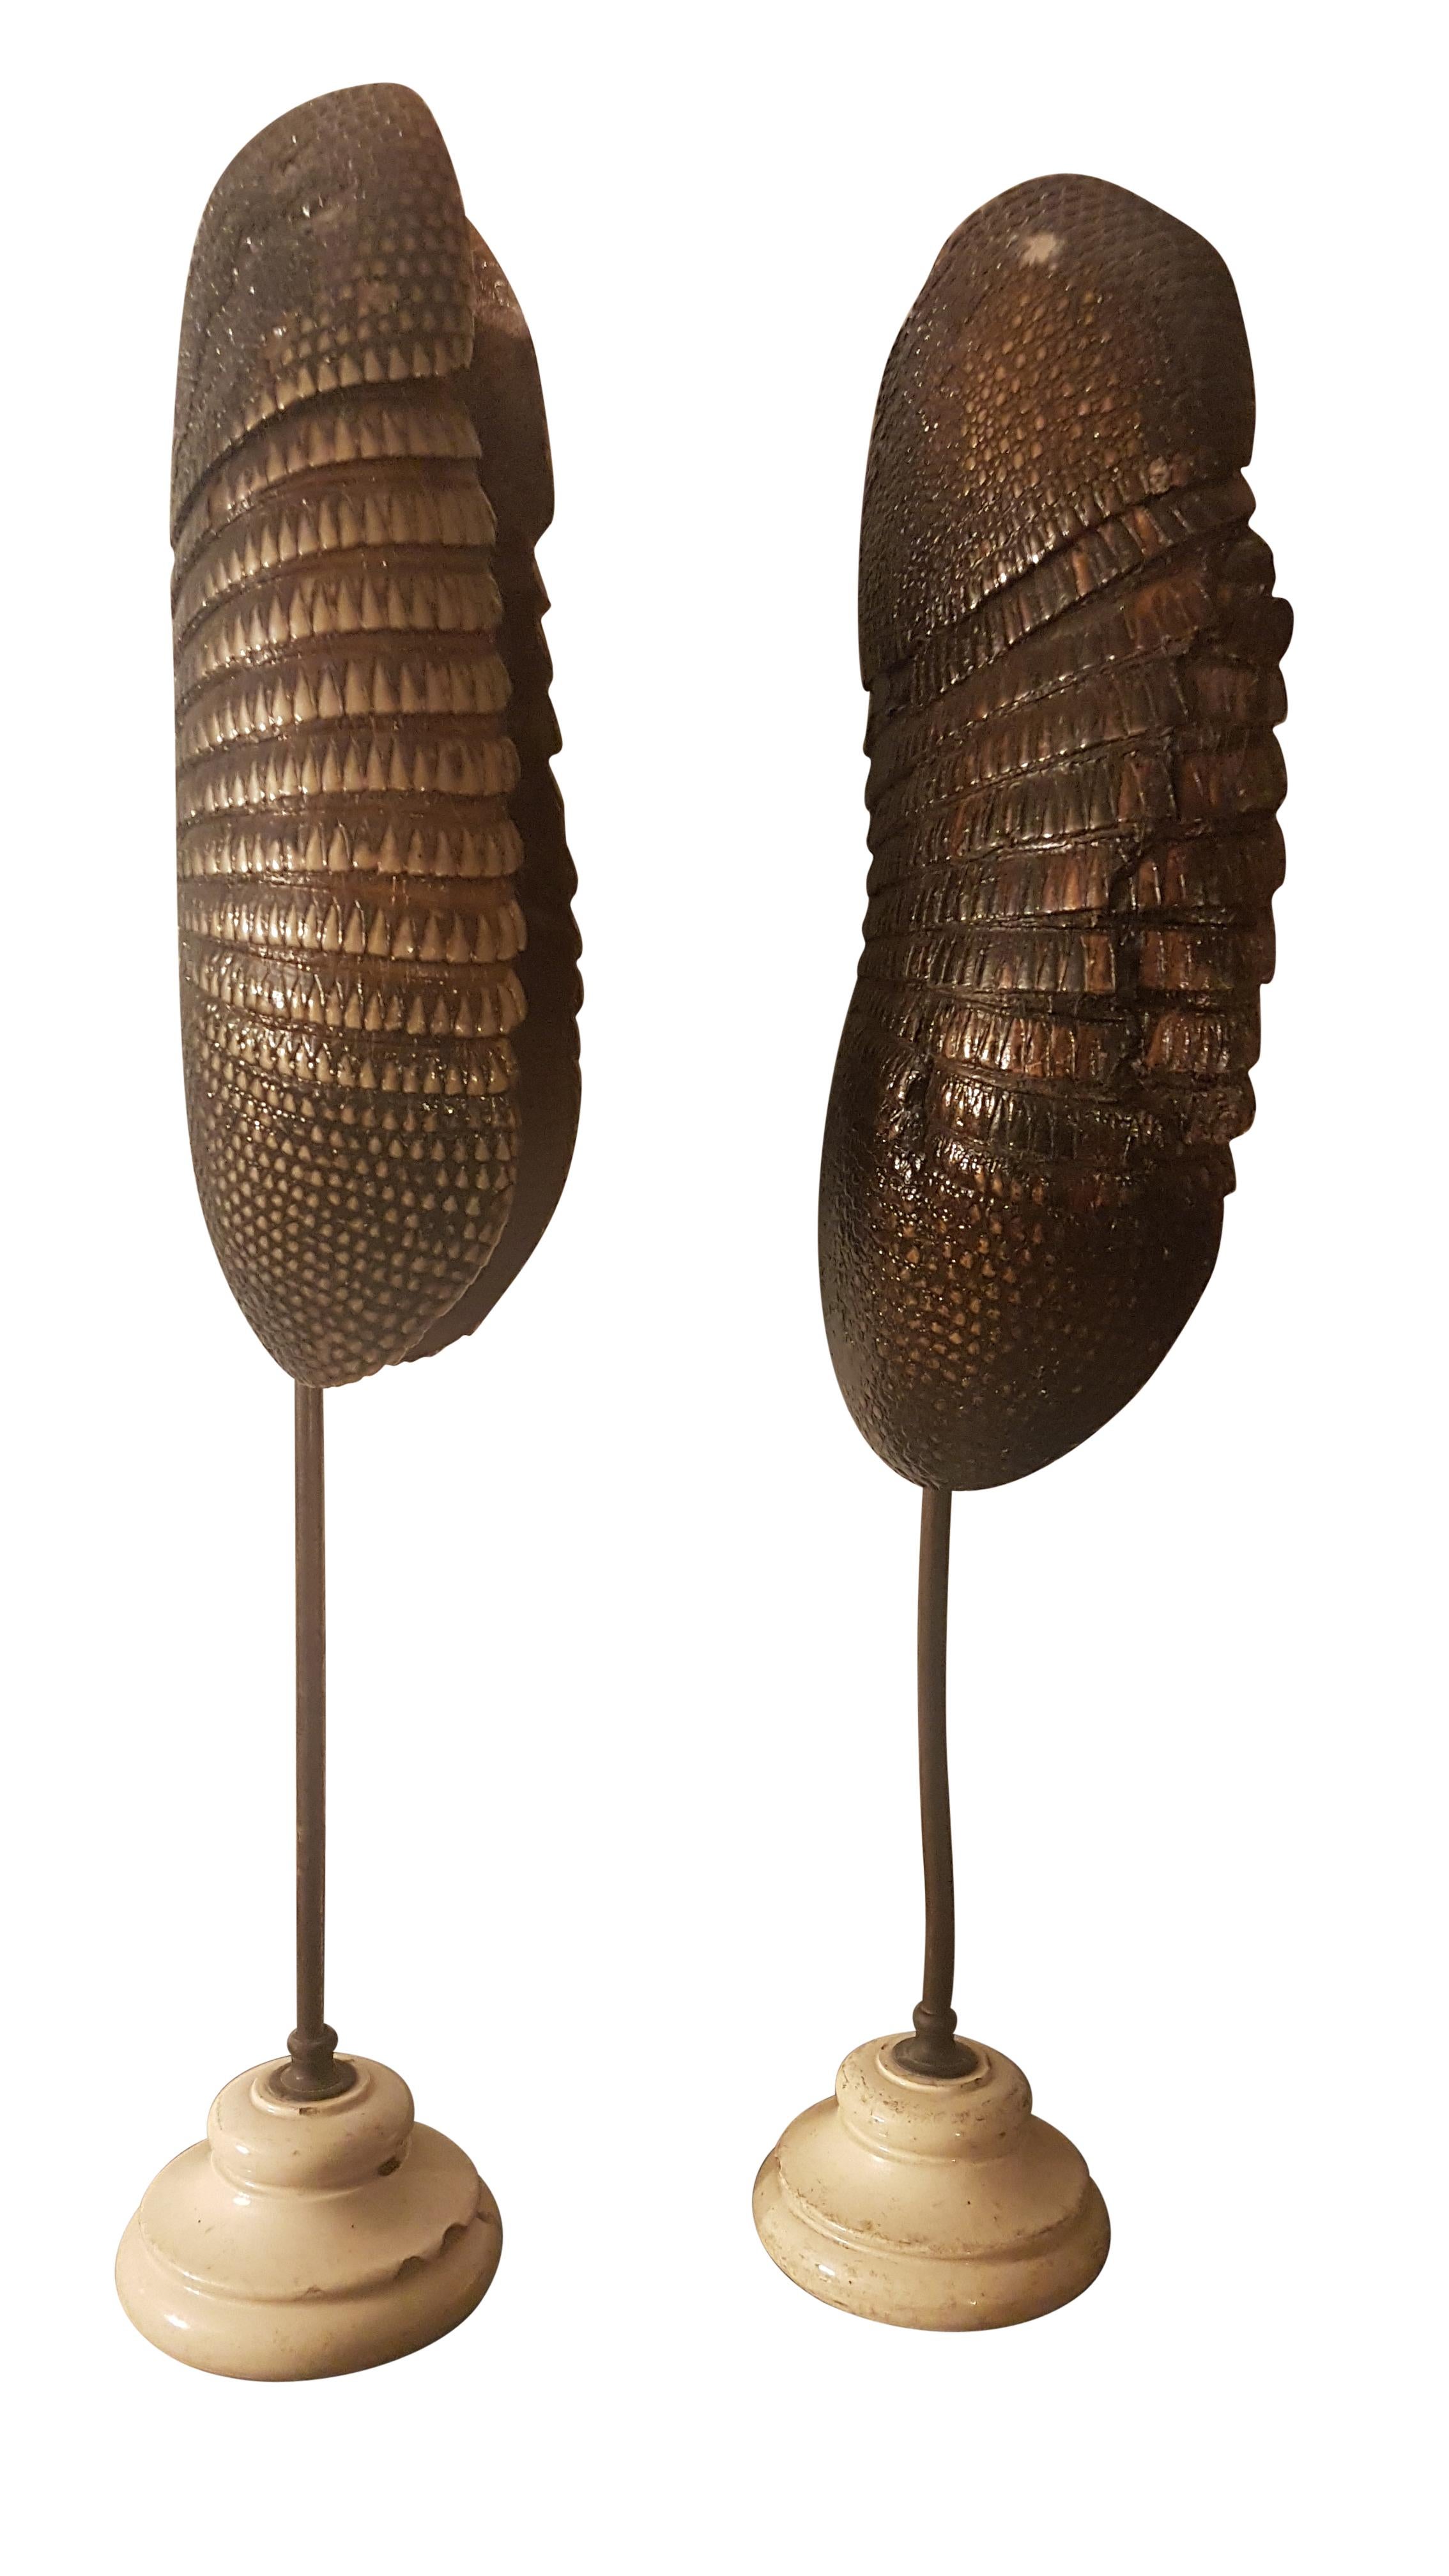 Patinated Pair of Late 19th Century Armadillo Shells on Stands